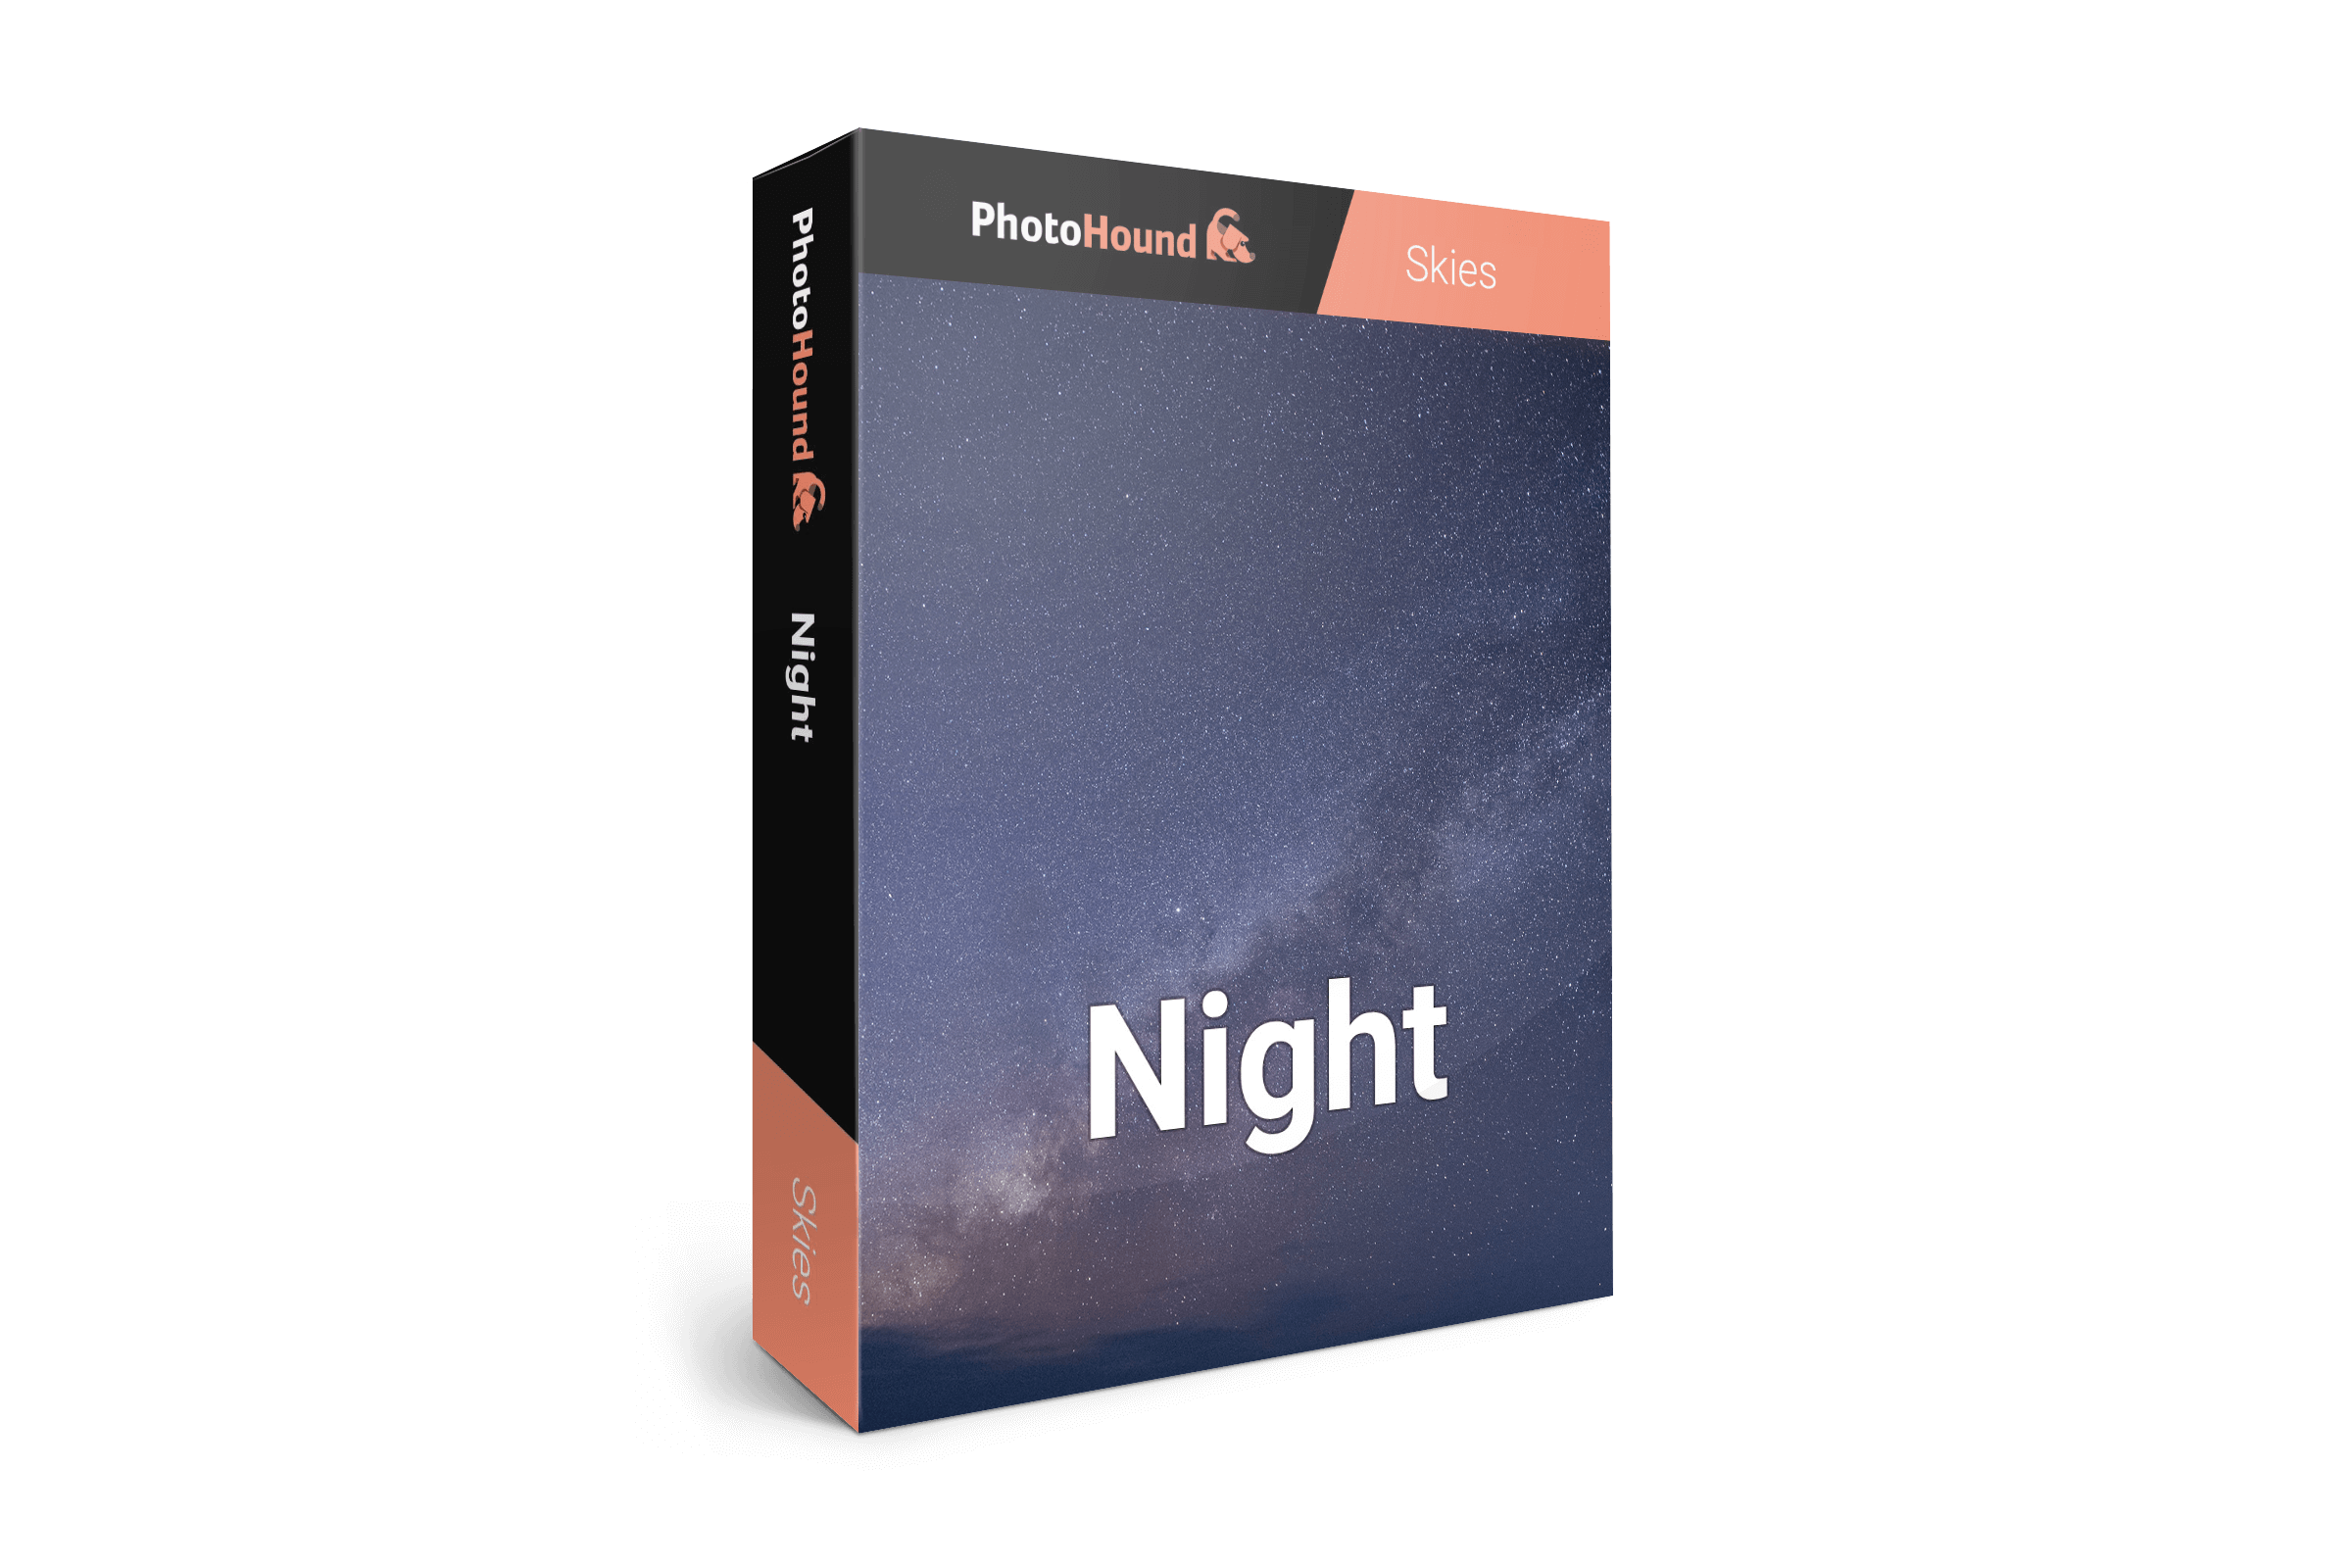 Free sky replacement images - night